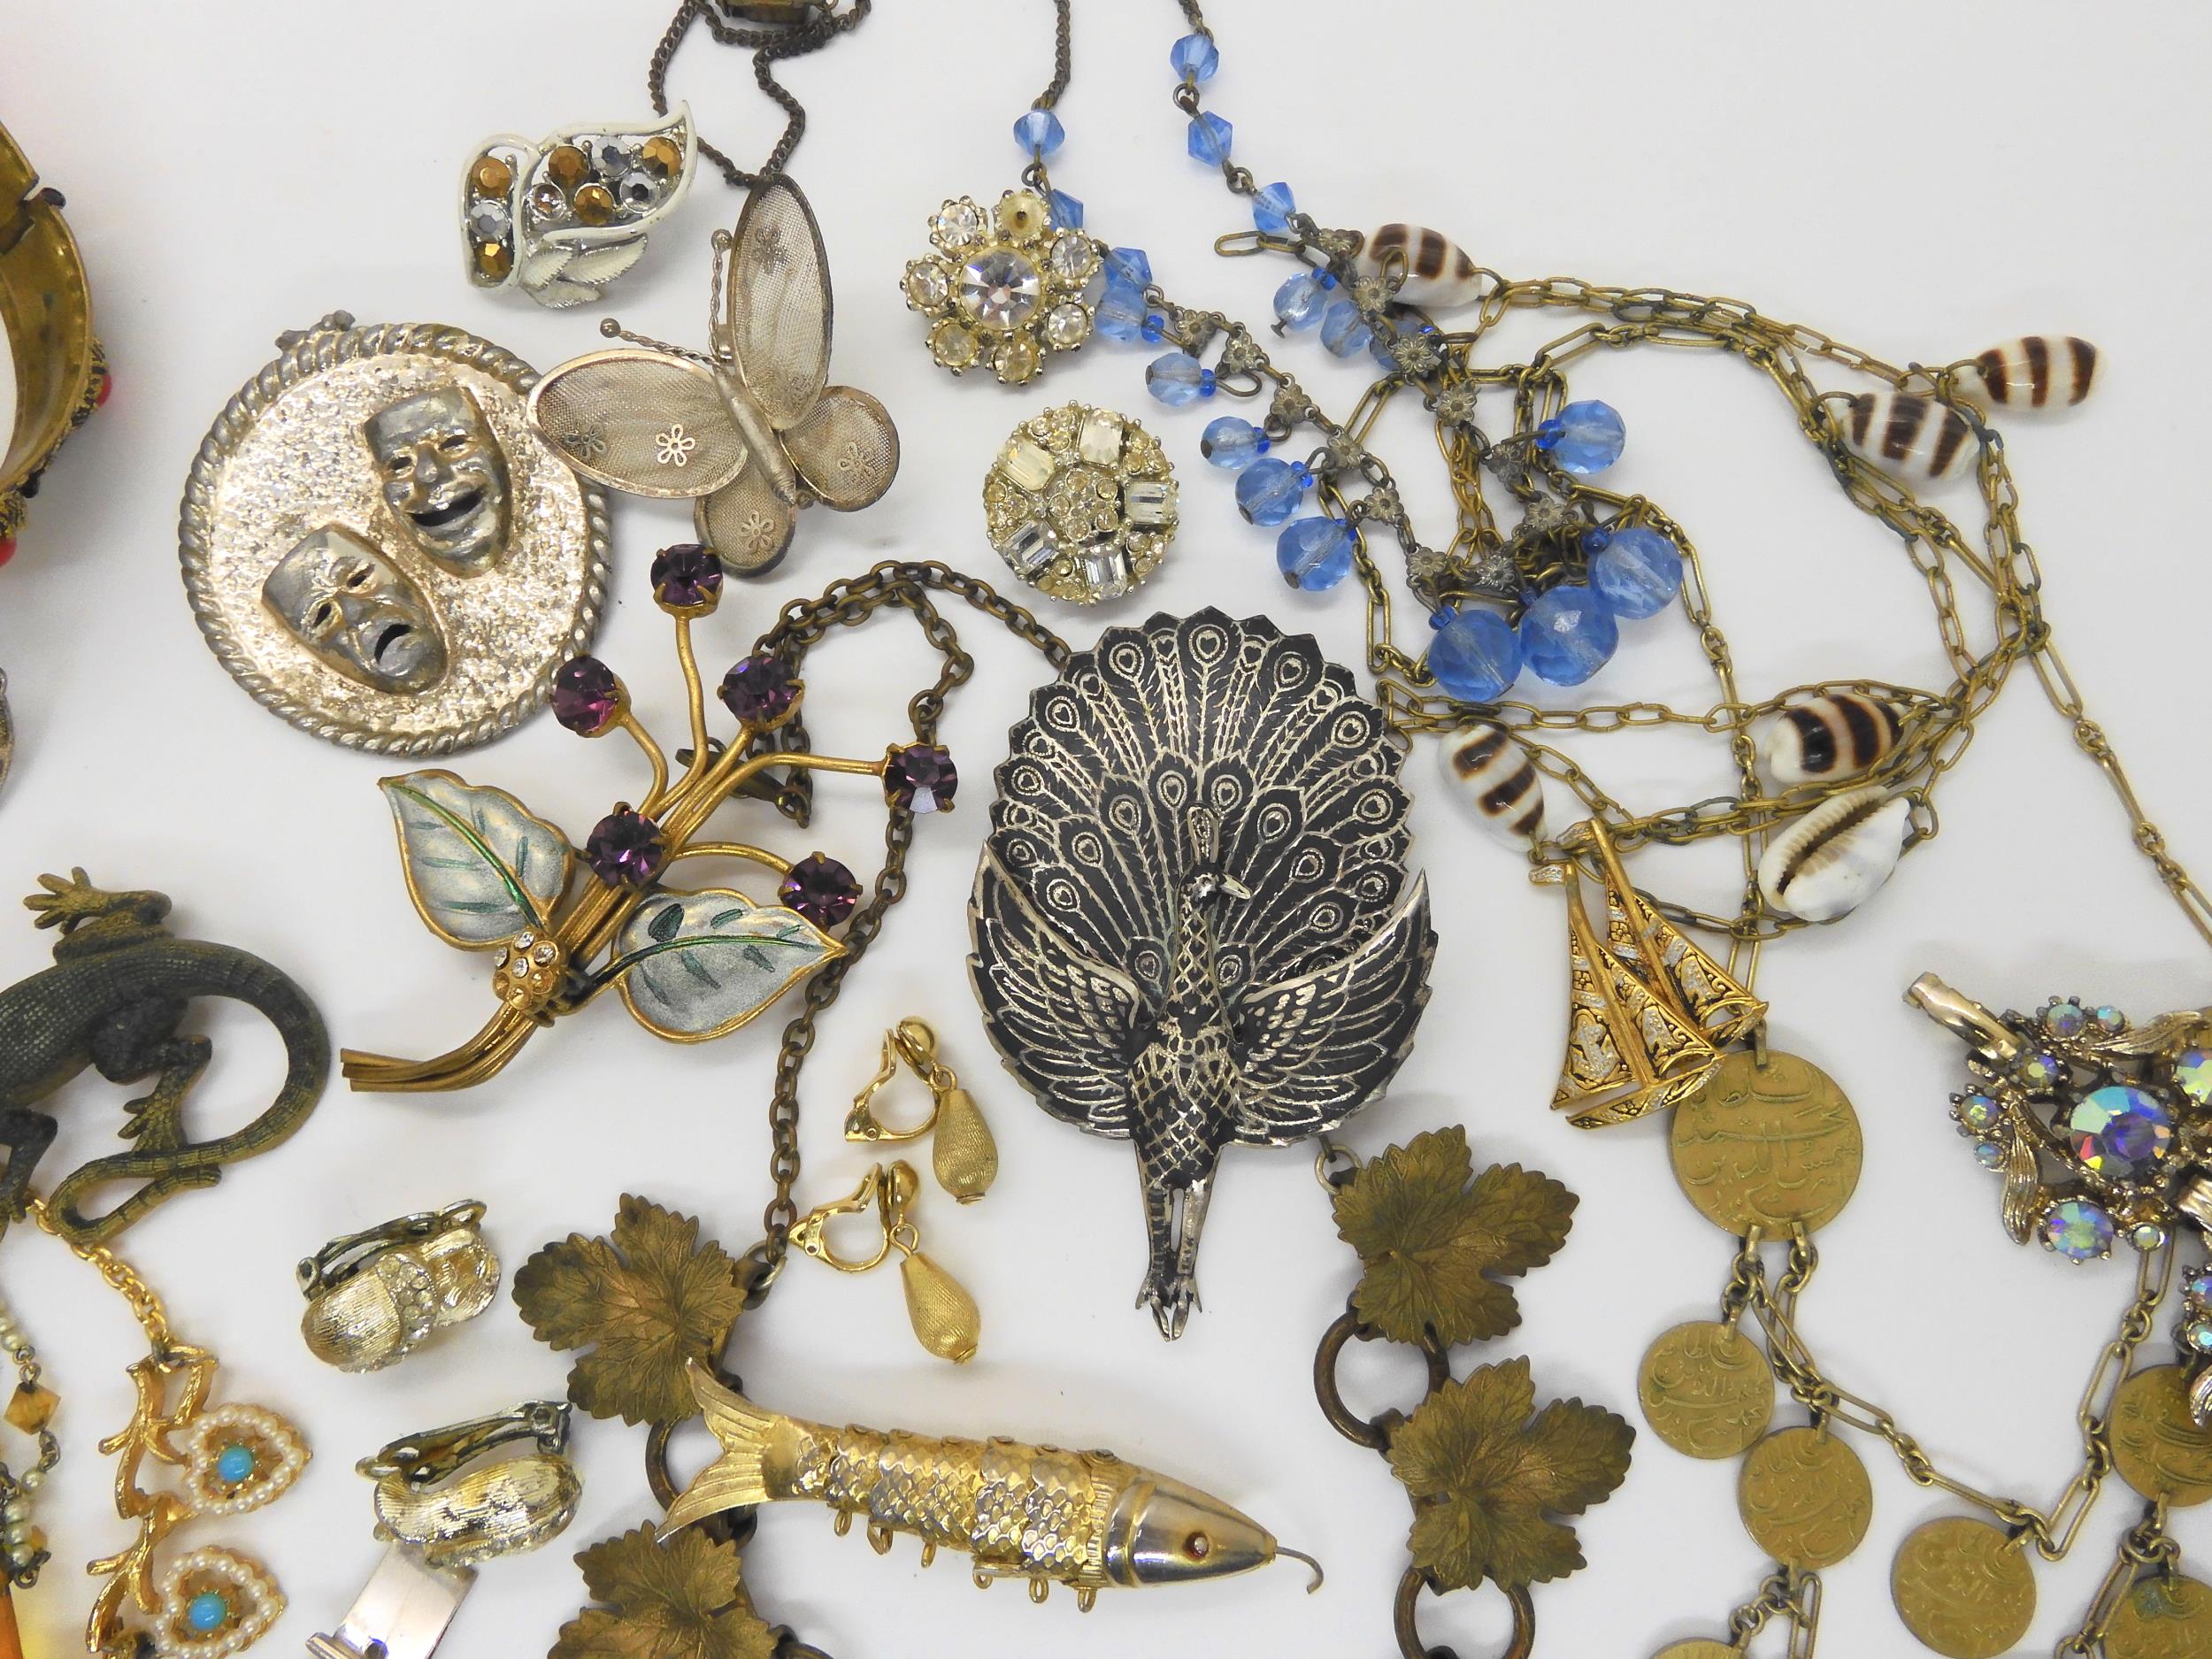 A silver gilt 'Partridge in a pear tree' pendant, a Siam wear peacock brooch and other items - Image 4 of 5